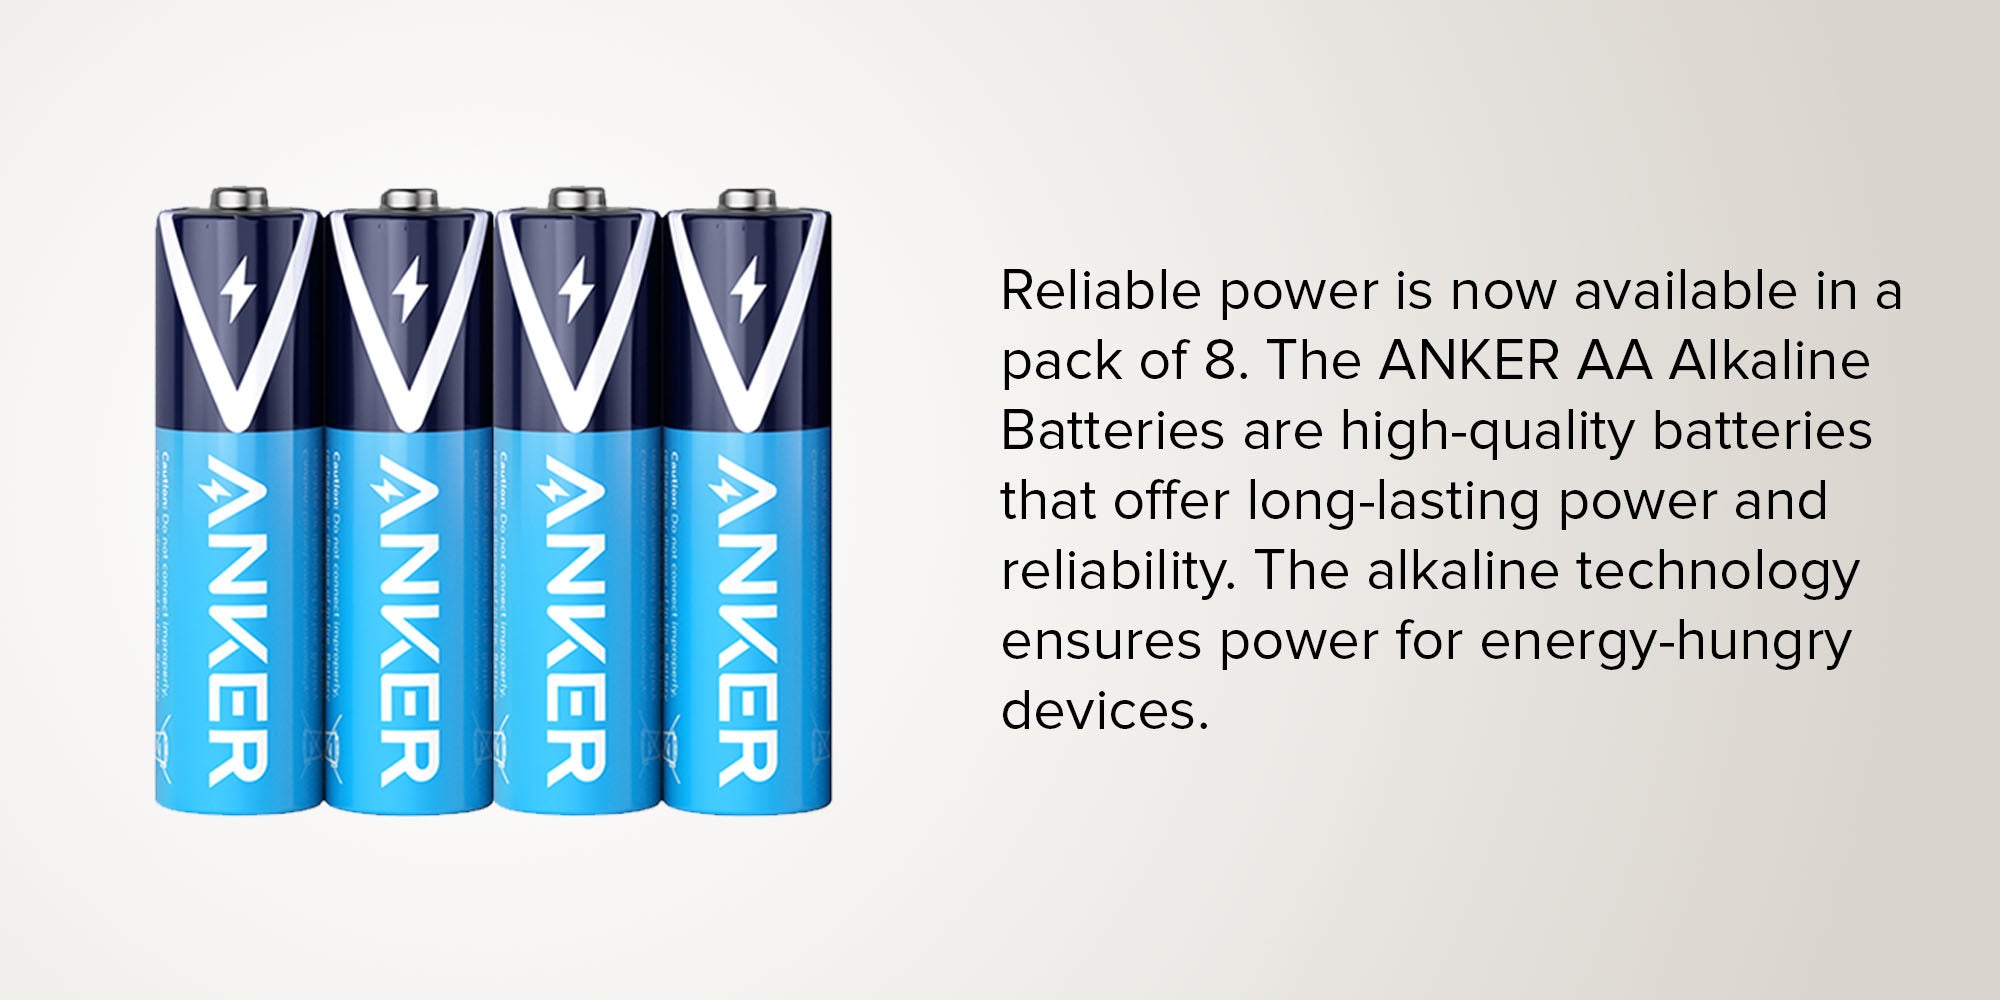 N37389993A 2 Anker &Lt;H1 Class=&Quot;Product_Title Entry-Title&Quot;&Gt;Anker Aa8 Alkaline Battery 8 Pack - B1810H13&Lt;/H1&Gt; Https://Www.youtube.com/Watch?V=H8Eld2V51Cw &Lt;Ul&Gt; &Lt;Li&Gt;Built With Premium Components And Advanced Engineering To Provide Superior Protection&Lt;/Li&Gt; &Lt;Li&Gt;Batteries Are Optimized For A Variety Of Different Devices&Lt;/Li&Gt; &Lt;Li&Gt;Allowing For Improved Efficiency And Universal Compatibility&Lt;/Li&Gt; &Lt;Li&Gt;High-Quality Alkaline Batteries Last Longer Than Conventional Batteries&Lt;/Li&Gt; &Lt;Li&Gt;Reliable Portable Power That Maximizes Fun, Productivity And Safety&Lt;/Li&Gt; &Lt;/Ul&Gt; &Lt;H1 Class=&Quot;Product_Title Entry-Title&Quot;&Gt;&Lt;A Style=&Quot;Font-Size: 16Px;&Quot; Href=&Quot;Https://Lablaab.com/Product-Category/Beauty-And-Personal-Care/&Quot;&Gt;More Products&Lt;/A&Gt;&Lt;/H1&Gt; &Lt;B&Gt;We Also Provide International Wholesale And Retail Shipping To All Gcc Countries: Saudi Arabia, Qatar, Oman, Kuwait, Bahrain. &Lt;/B&Gt; Anker Aa8 Alkaline Battery Anker Aa8 Alkaline Battery 8 Pack - B1810H13